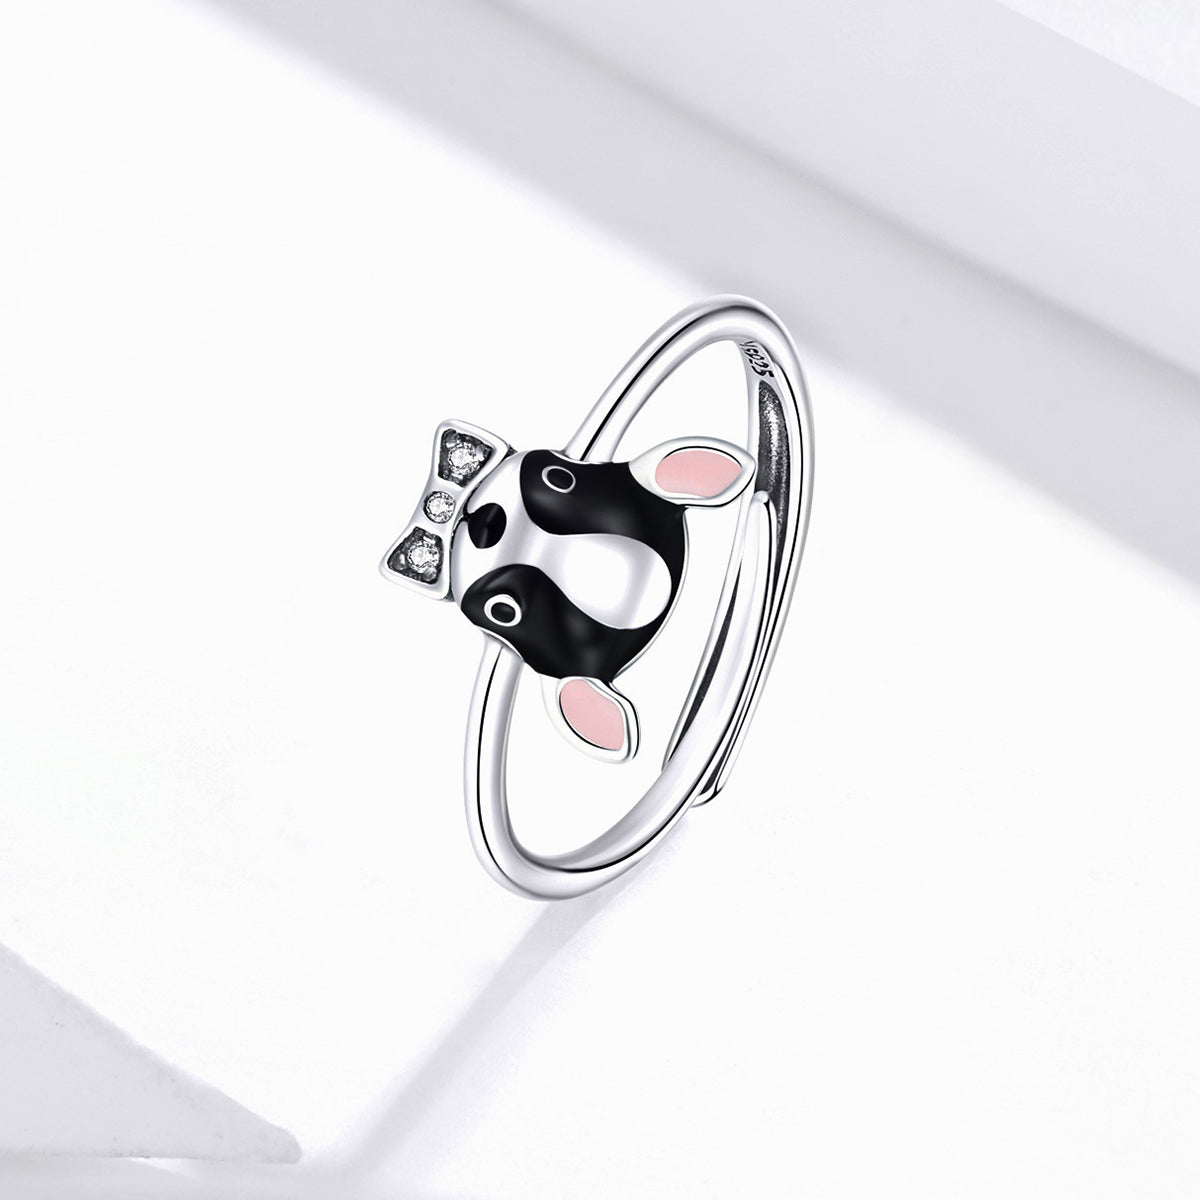 Sterling Silver French Bulldog Dog Adjustable Hypoallergenic Ring